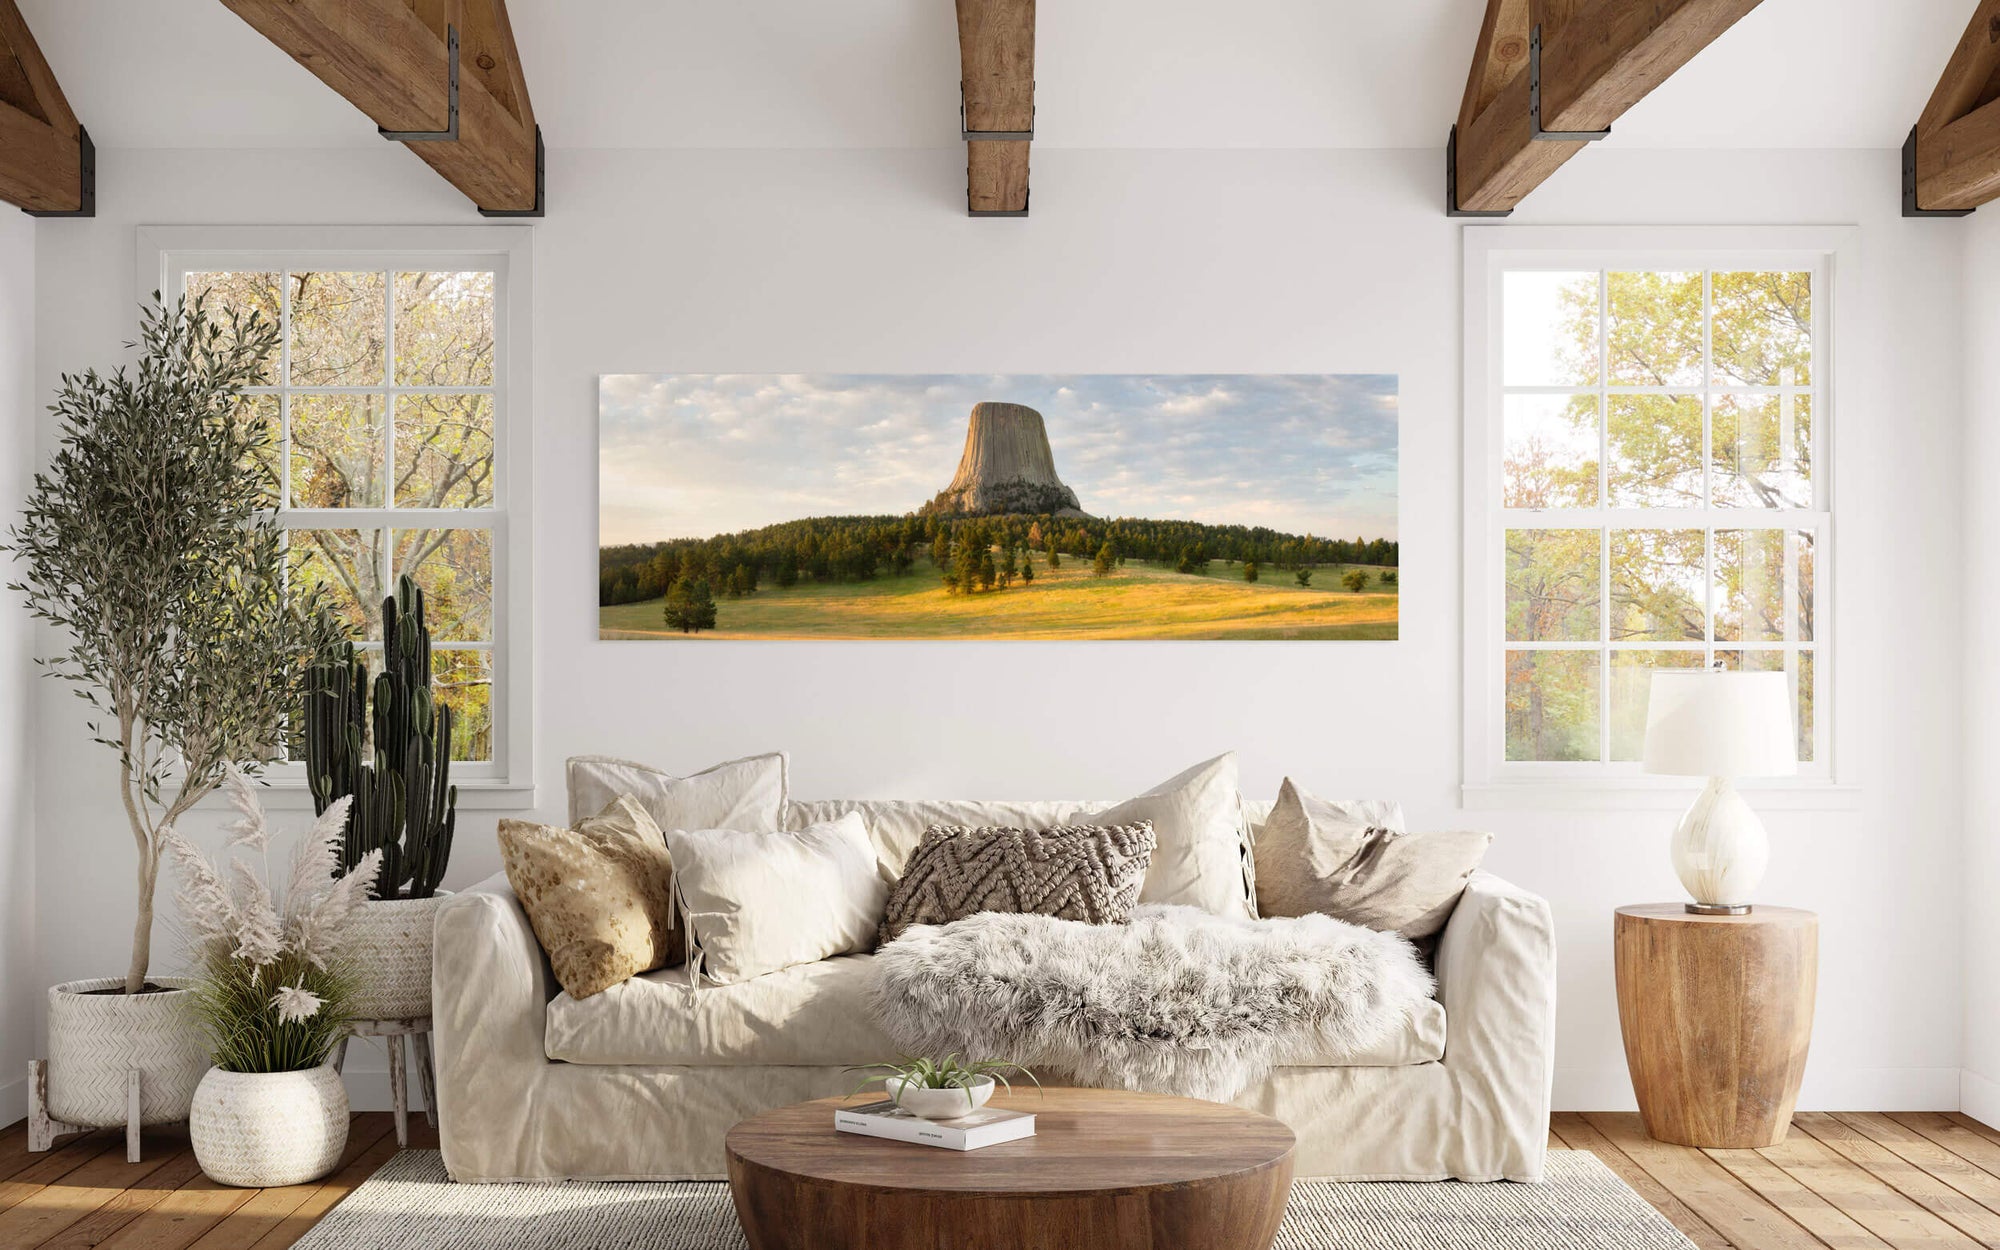 A Devil's Tower National Monument picture at sunrise in Wyoming hangs in a living room.